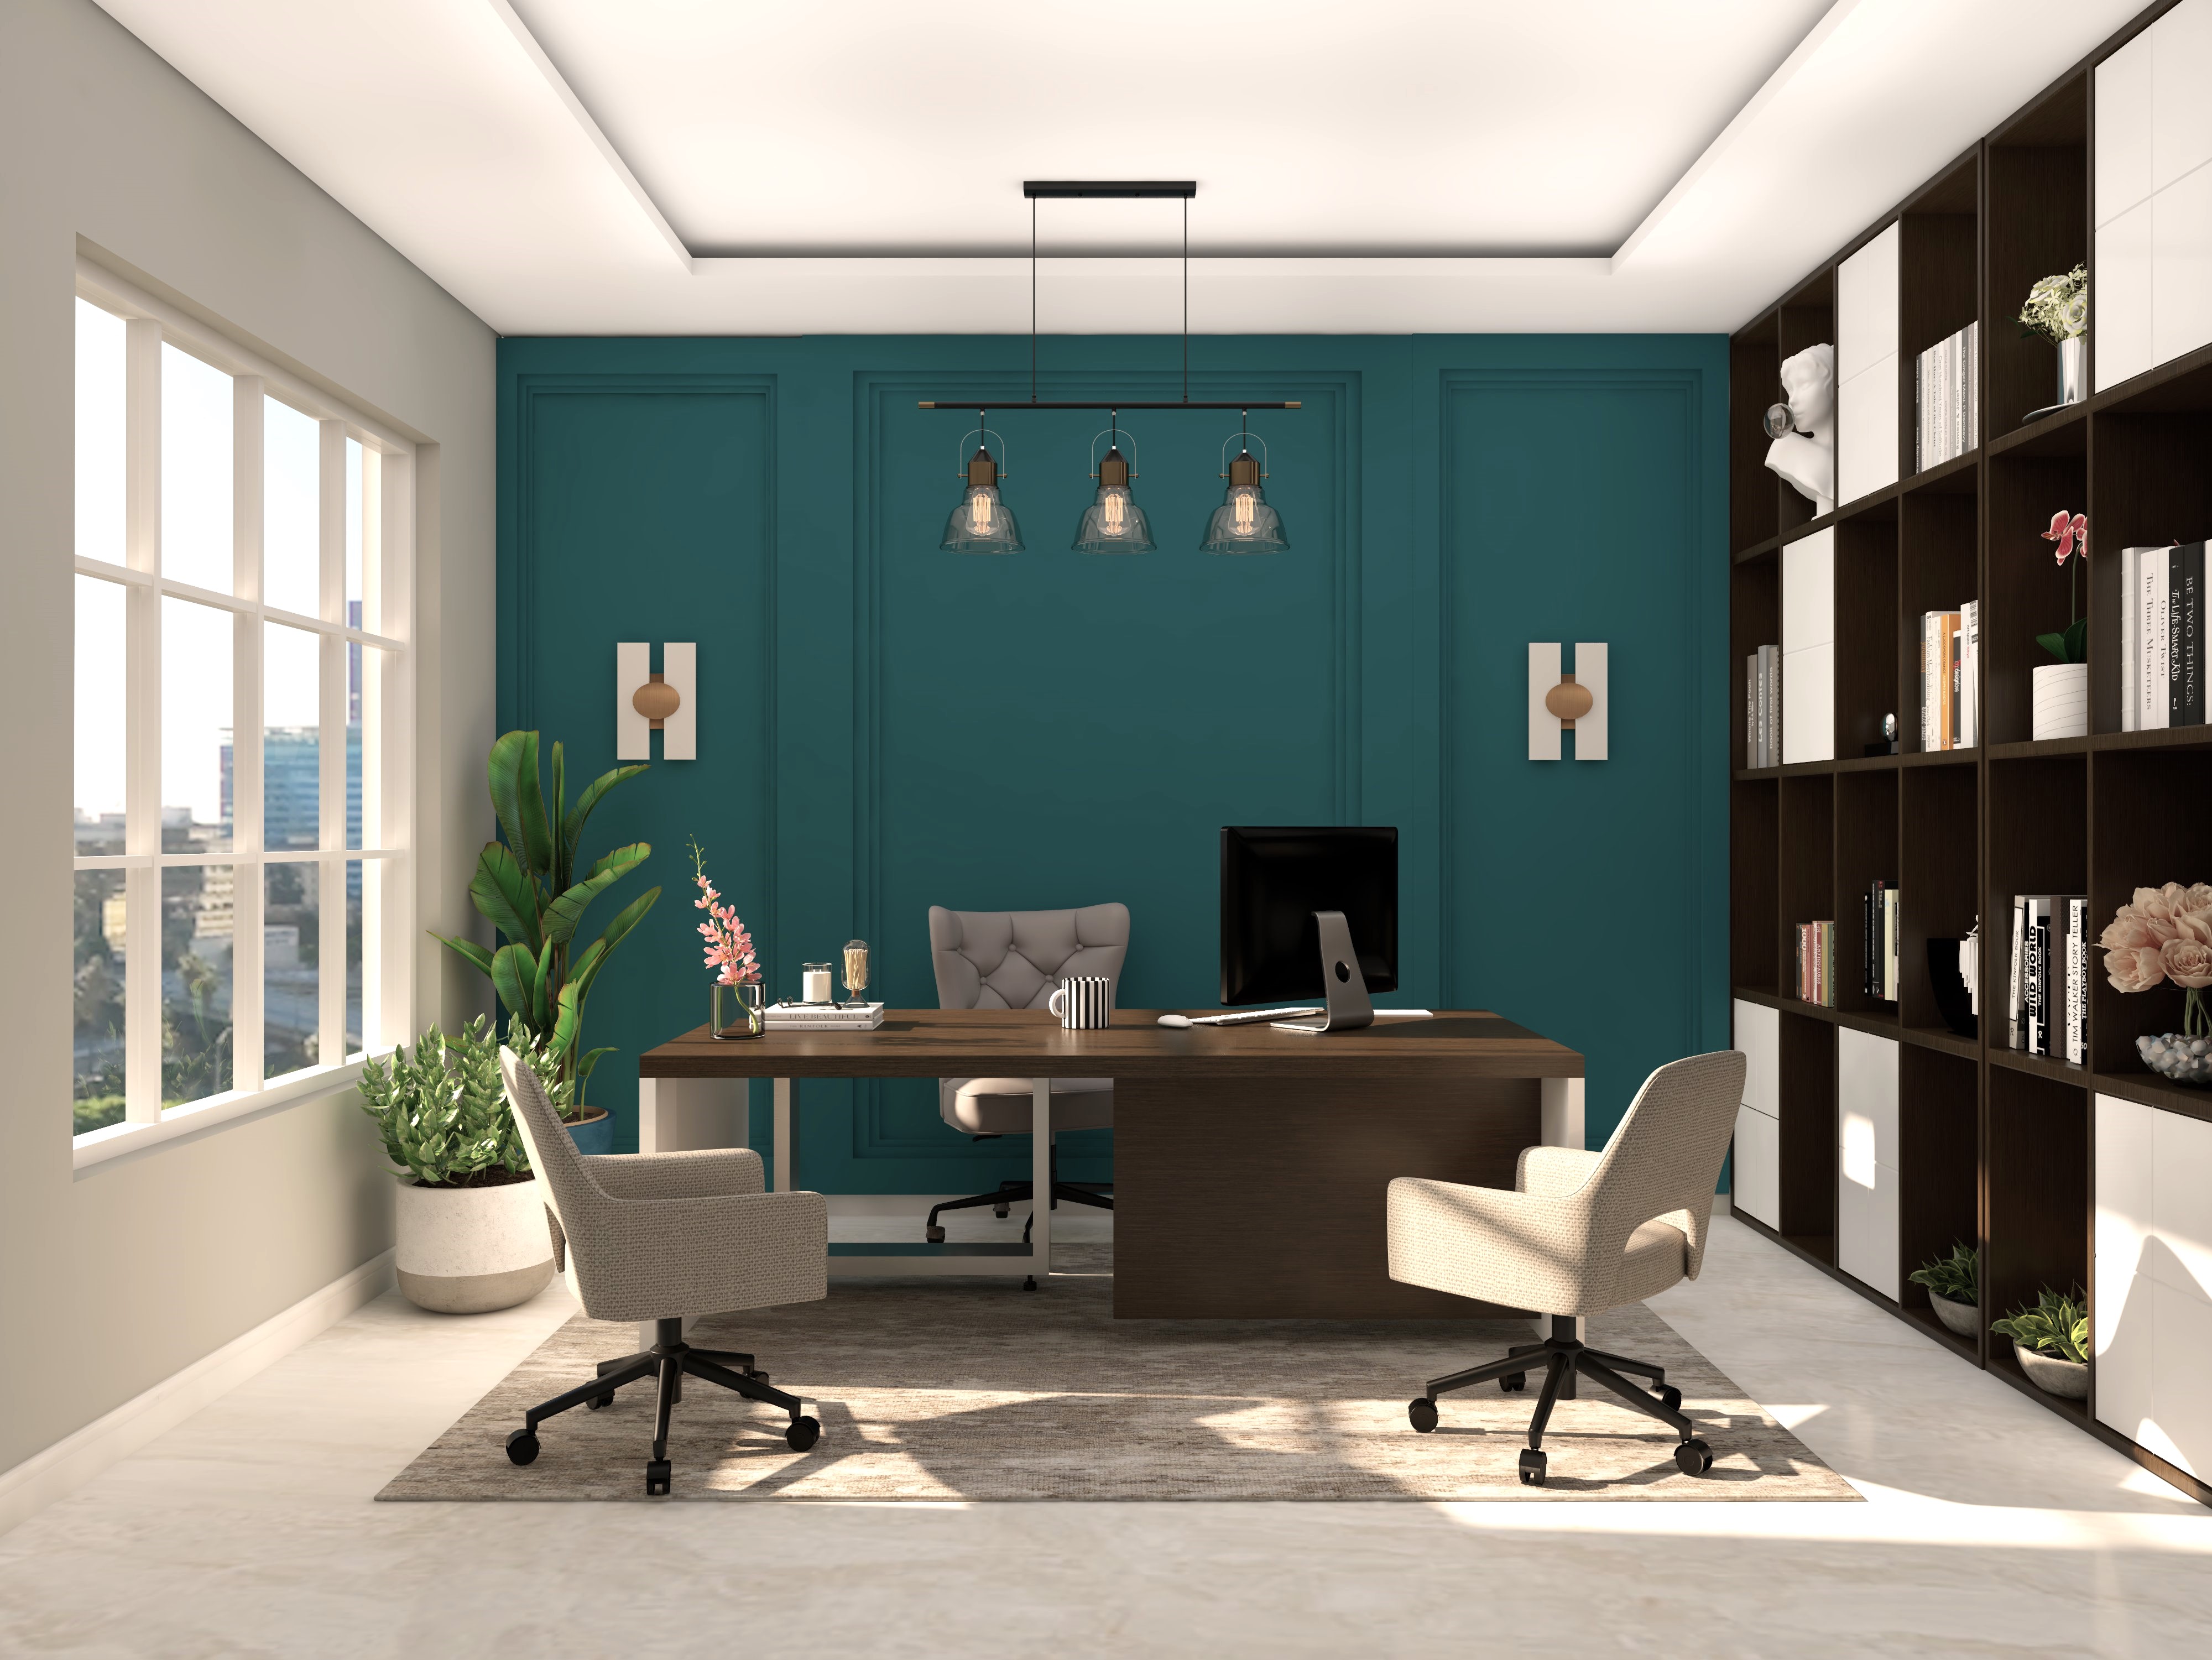 Home office with teal blue wainscoting and wall shelves - Beautiful Homes